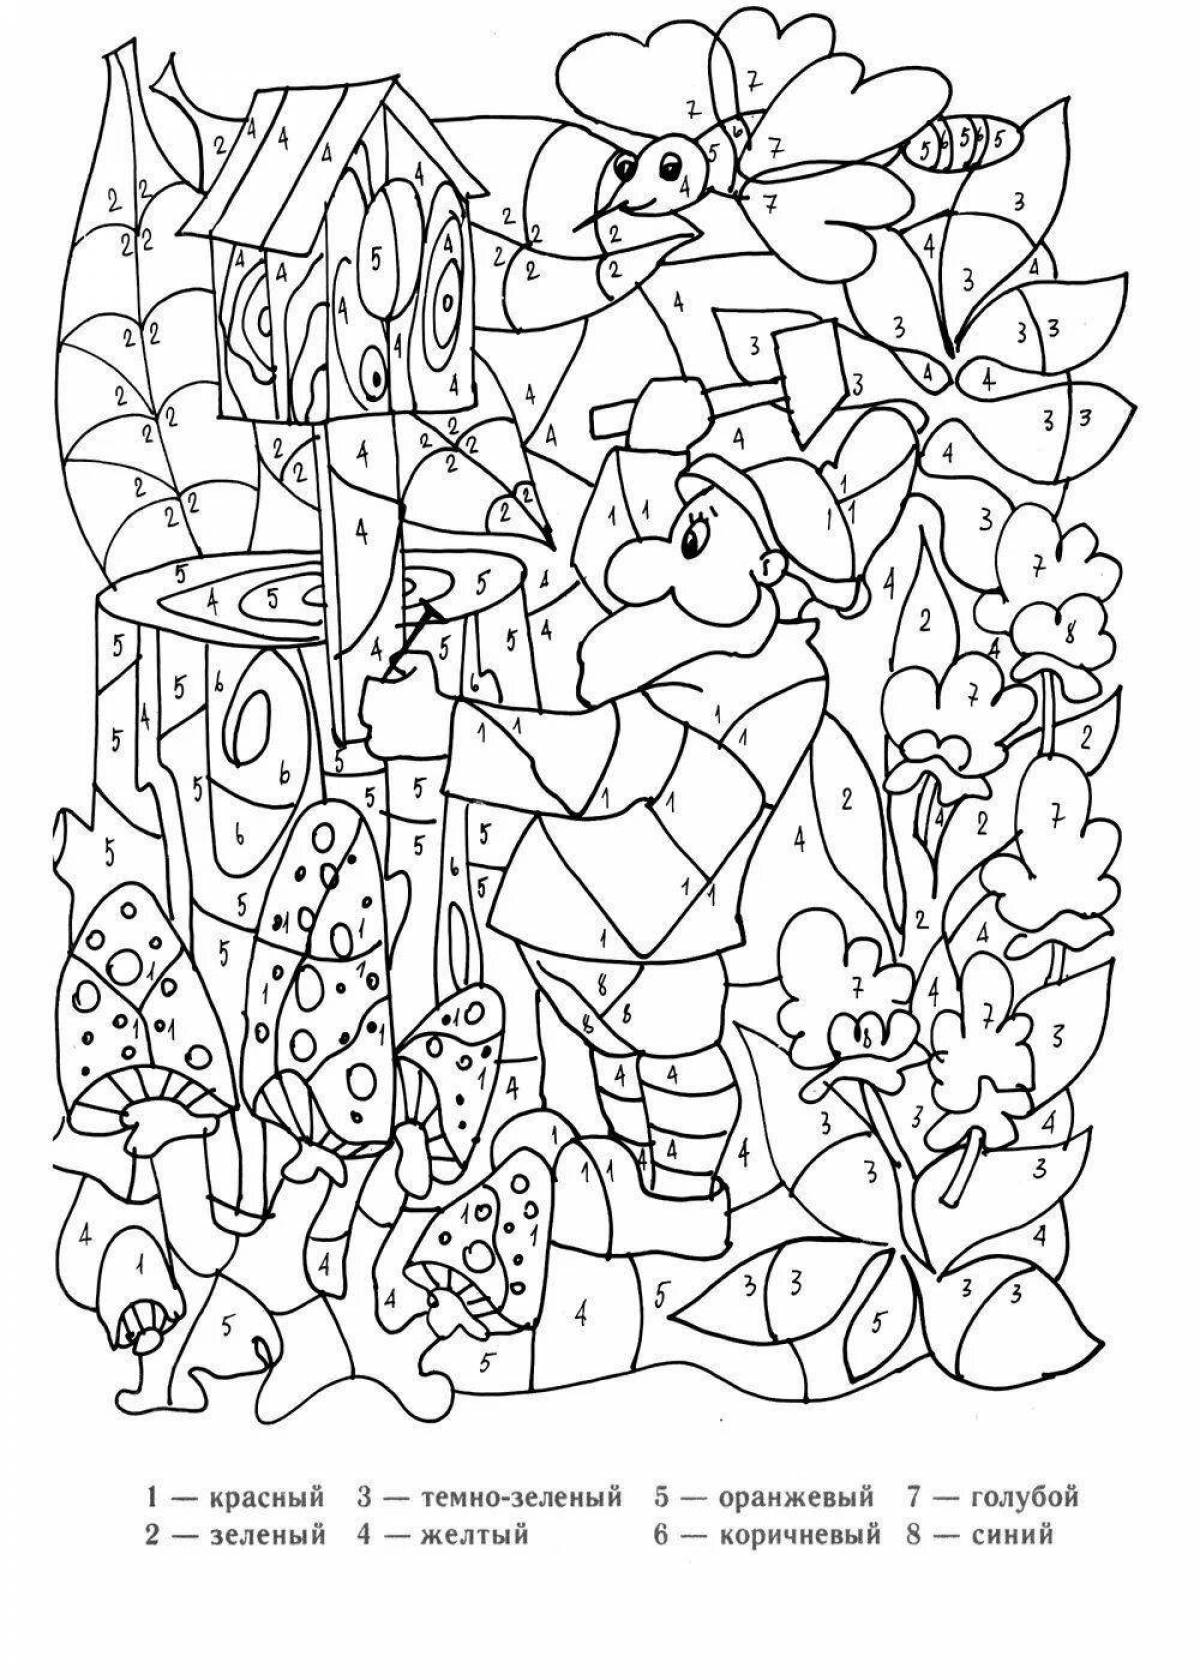 Fun coloring book for 5-7 year olds